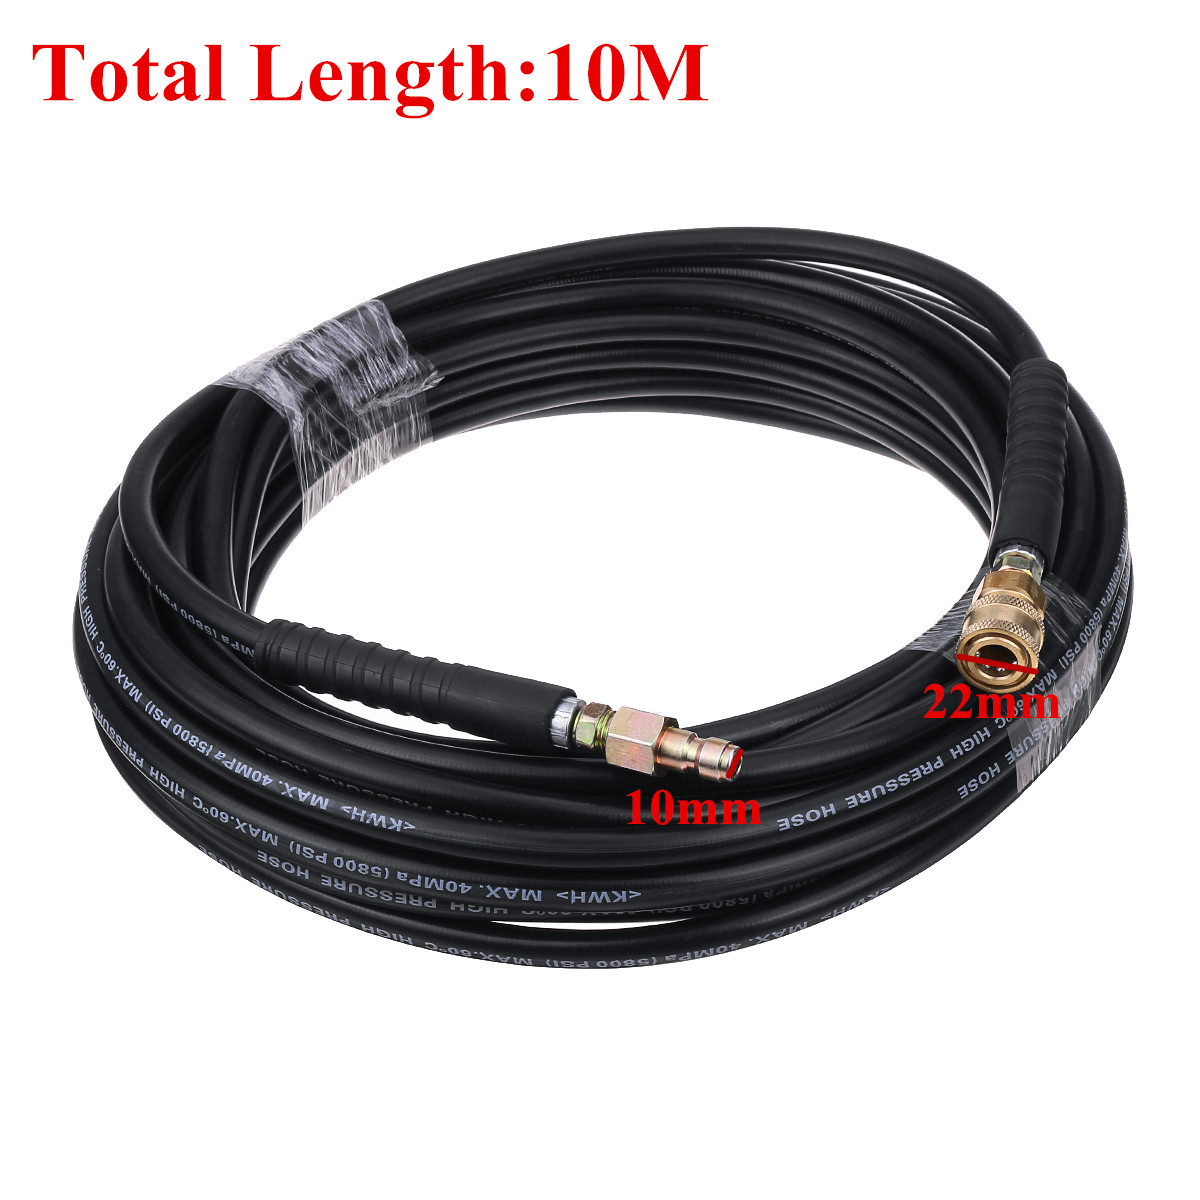 10M-High-Pressure-Washer-Hose-14-Inch-Quick-Release-Couplings-Tube-1582199-2